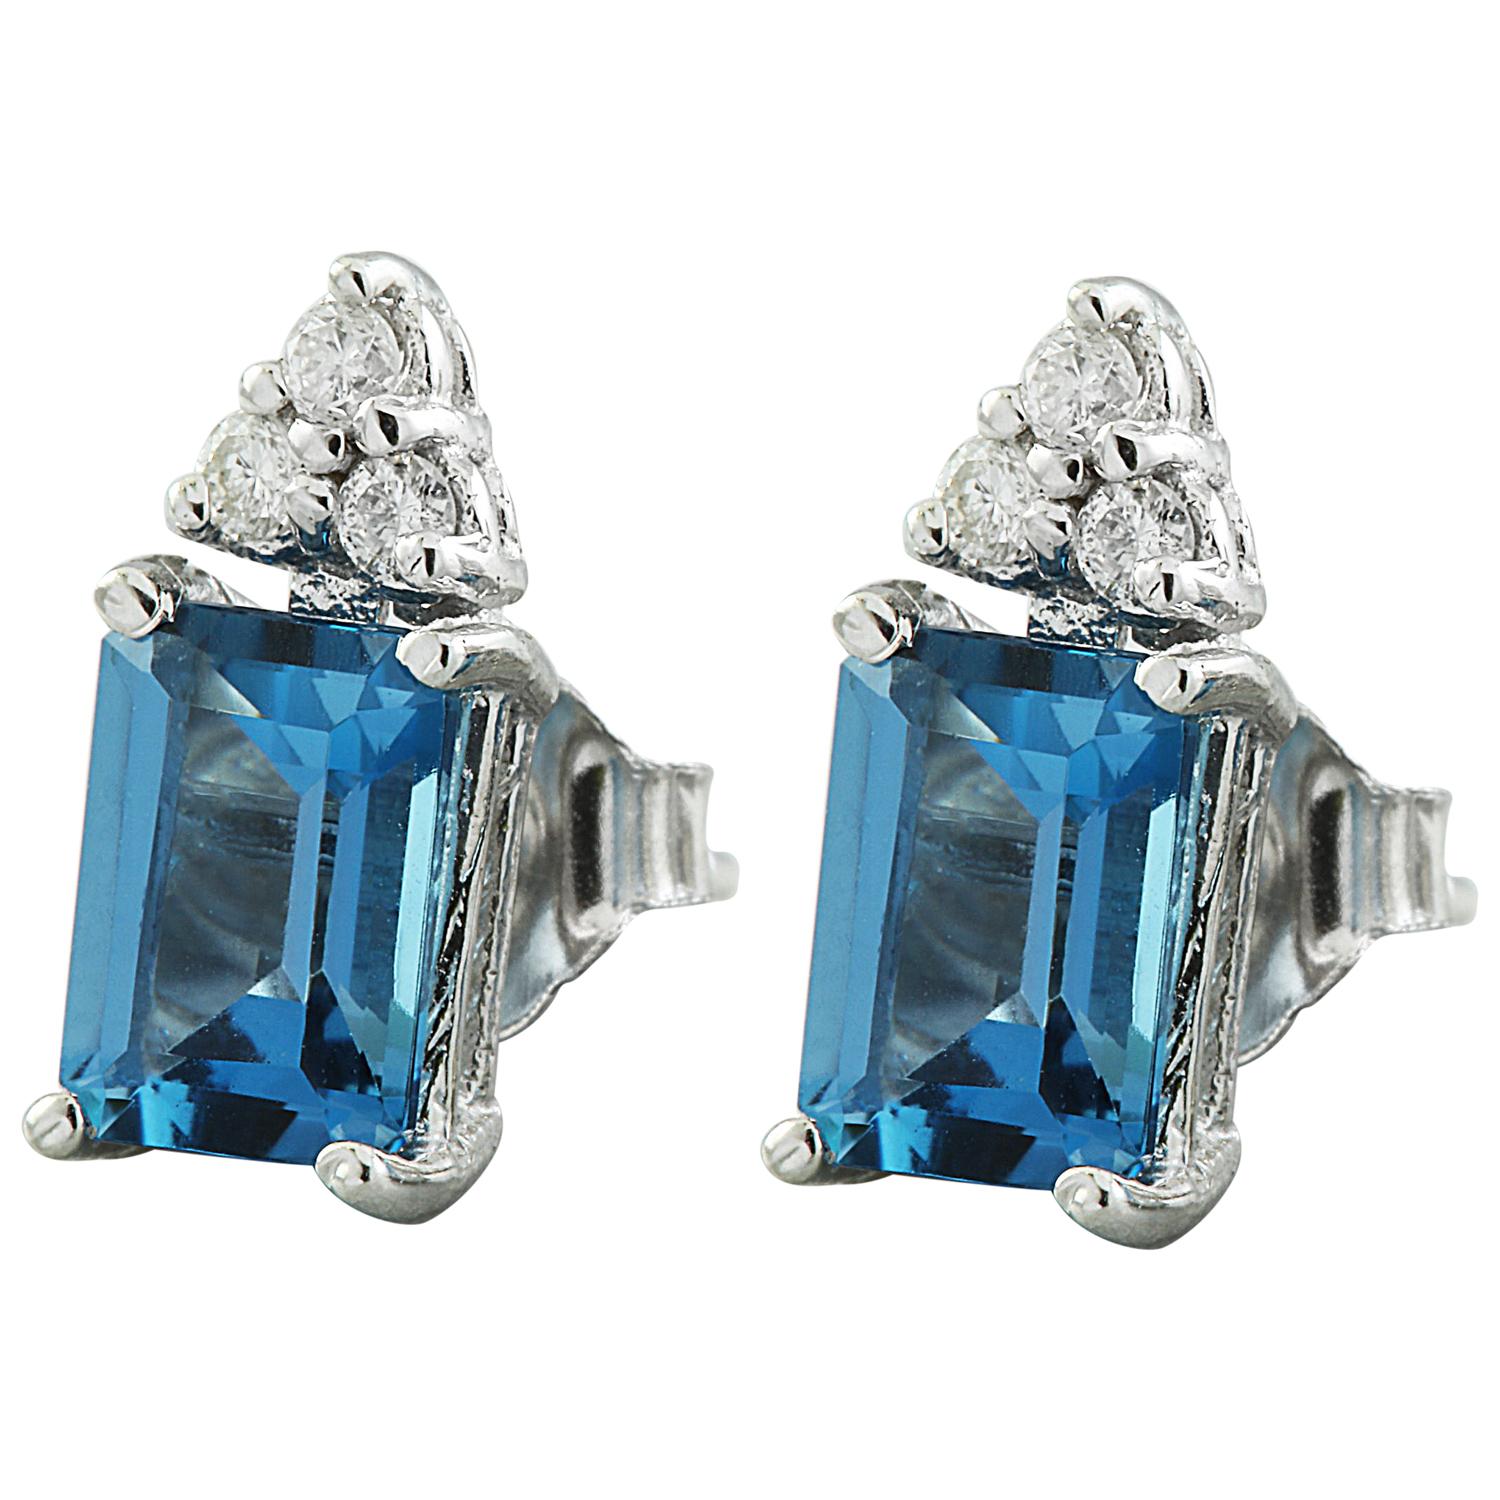 2.65 Carat Natural Topaz 14 Karat Solid White Gold Diamond Earrings
Stamped: 14K 
Total Earrings Weight: 1.5 Grams 
Topaz Weight: 2.50 Carat (7.00x5.00 Millimeters)  
Quantity: 2
Diamond Weight: 0.15 Carat (F-G Color, VS2-SI1 Clarity )
Quantity: